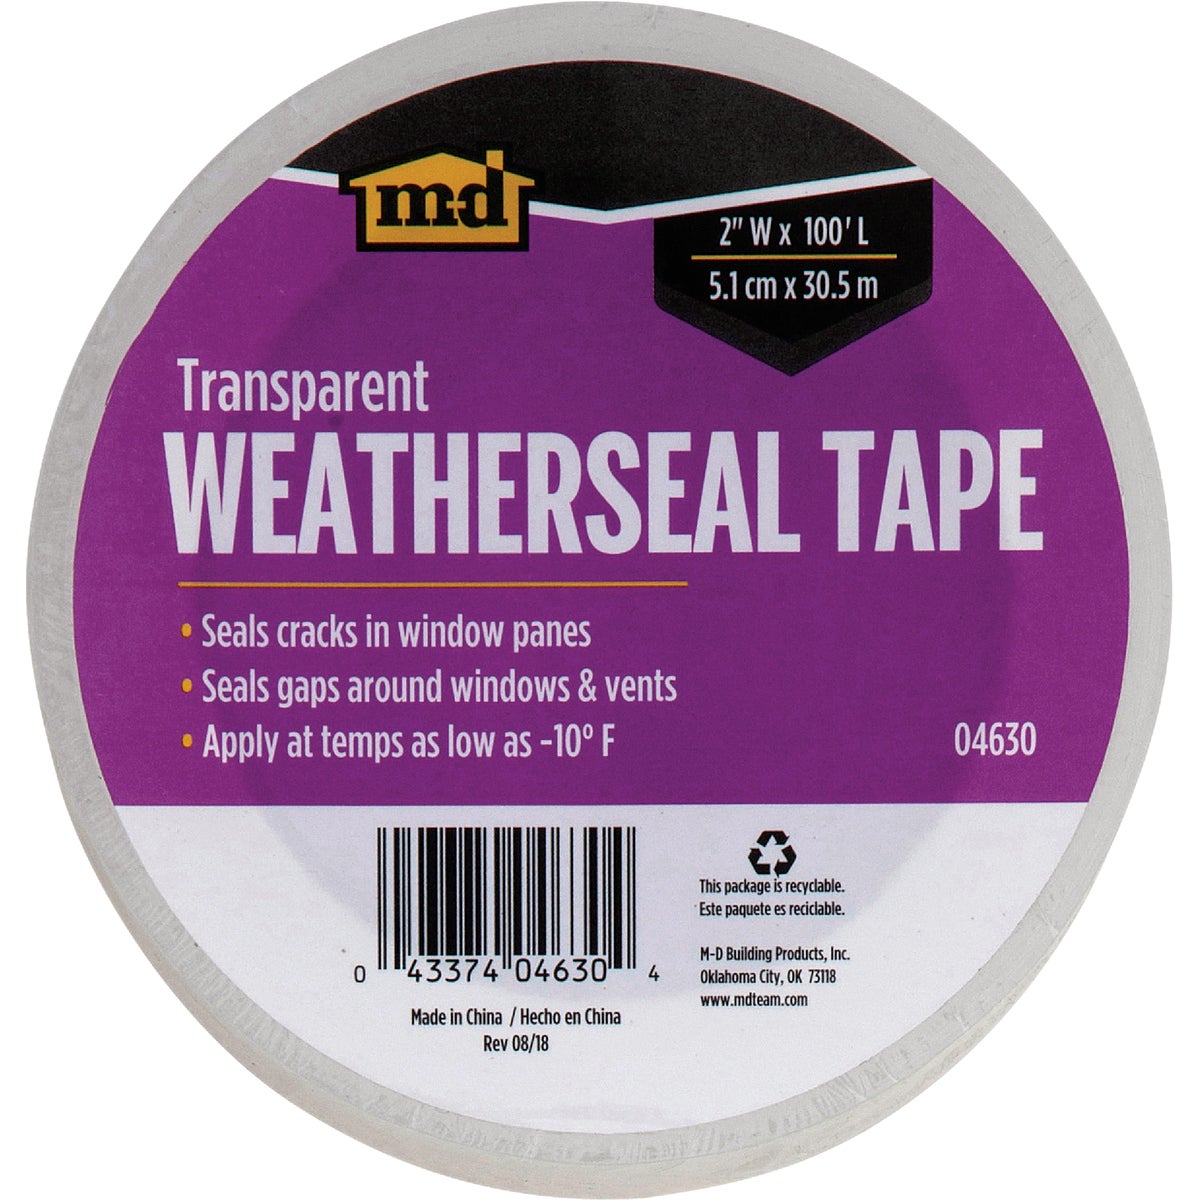 M-D 2 In. x 100 Ft. Transparent Weatherseal Tape